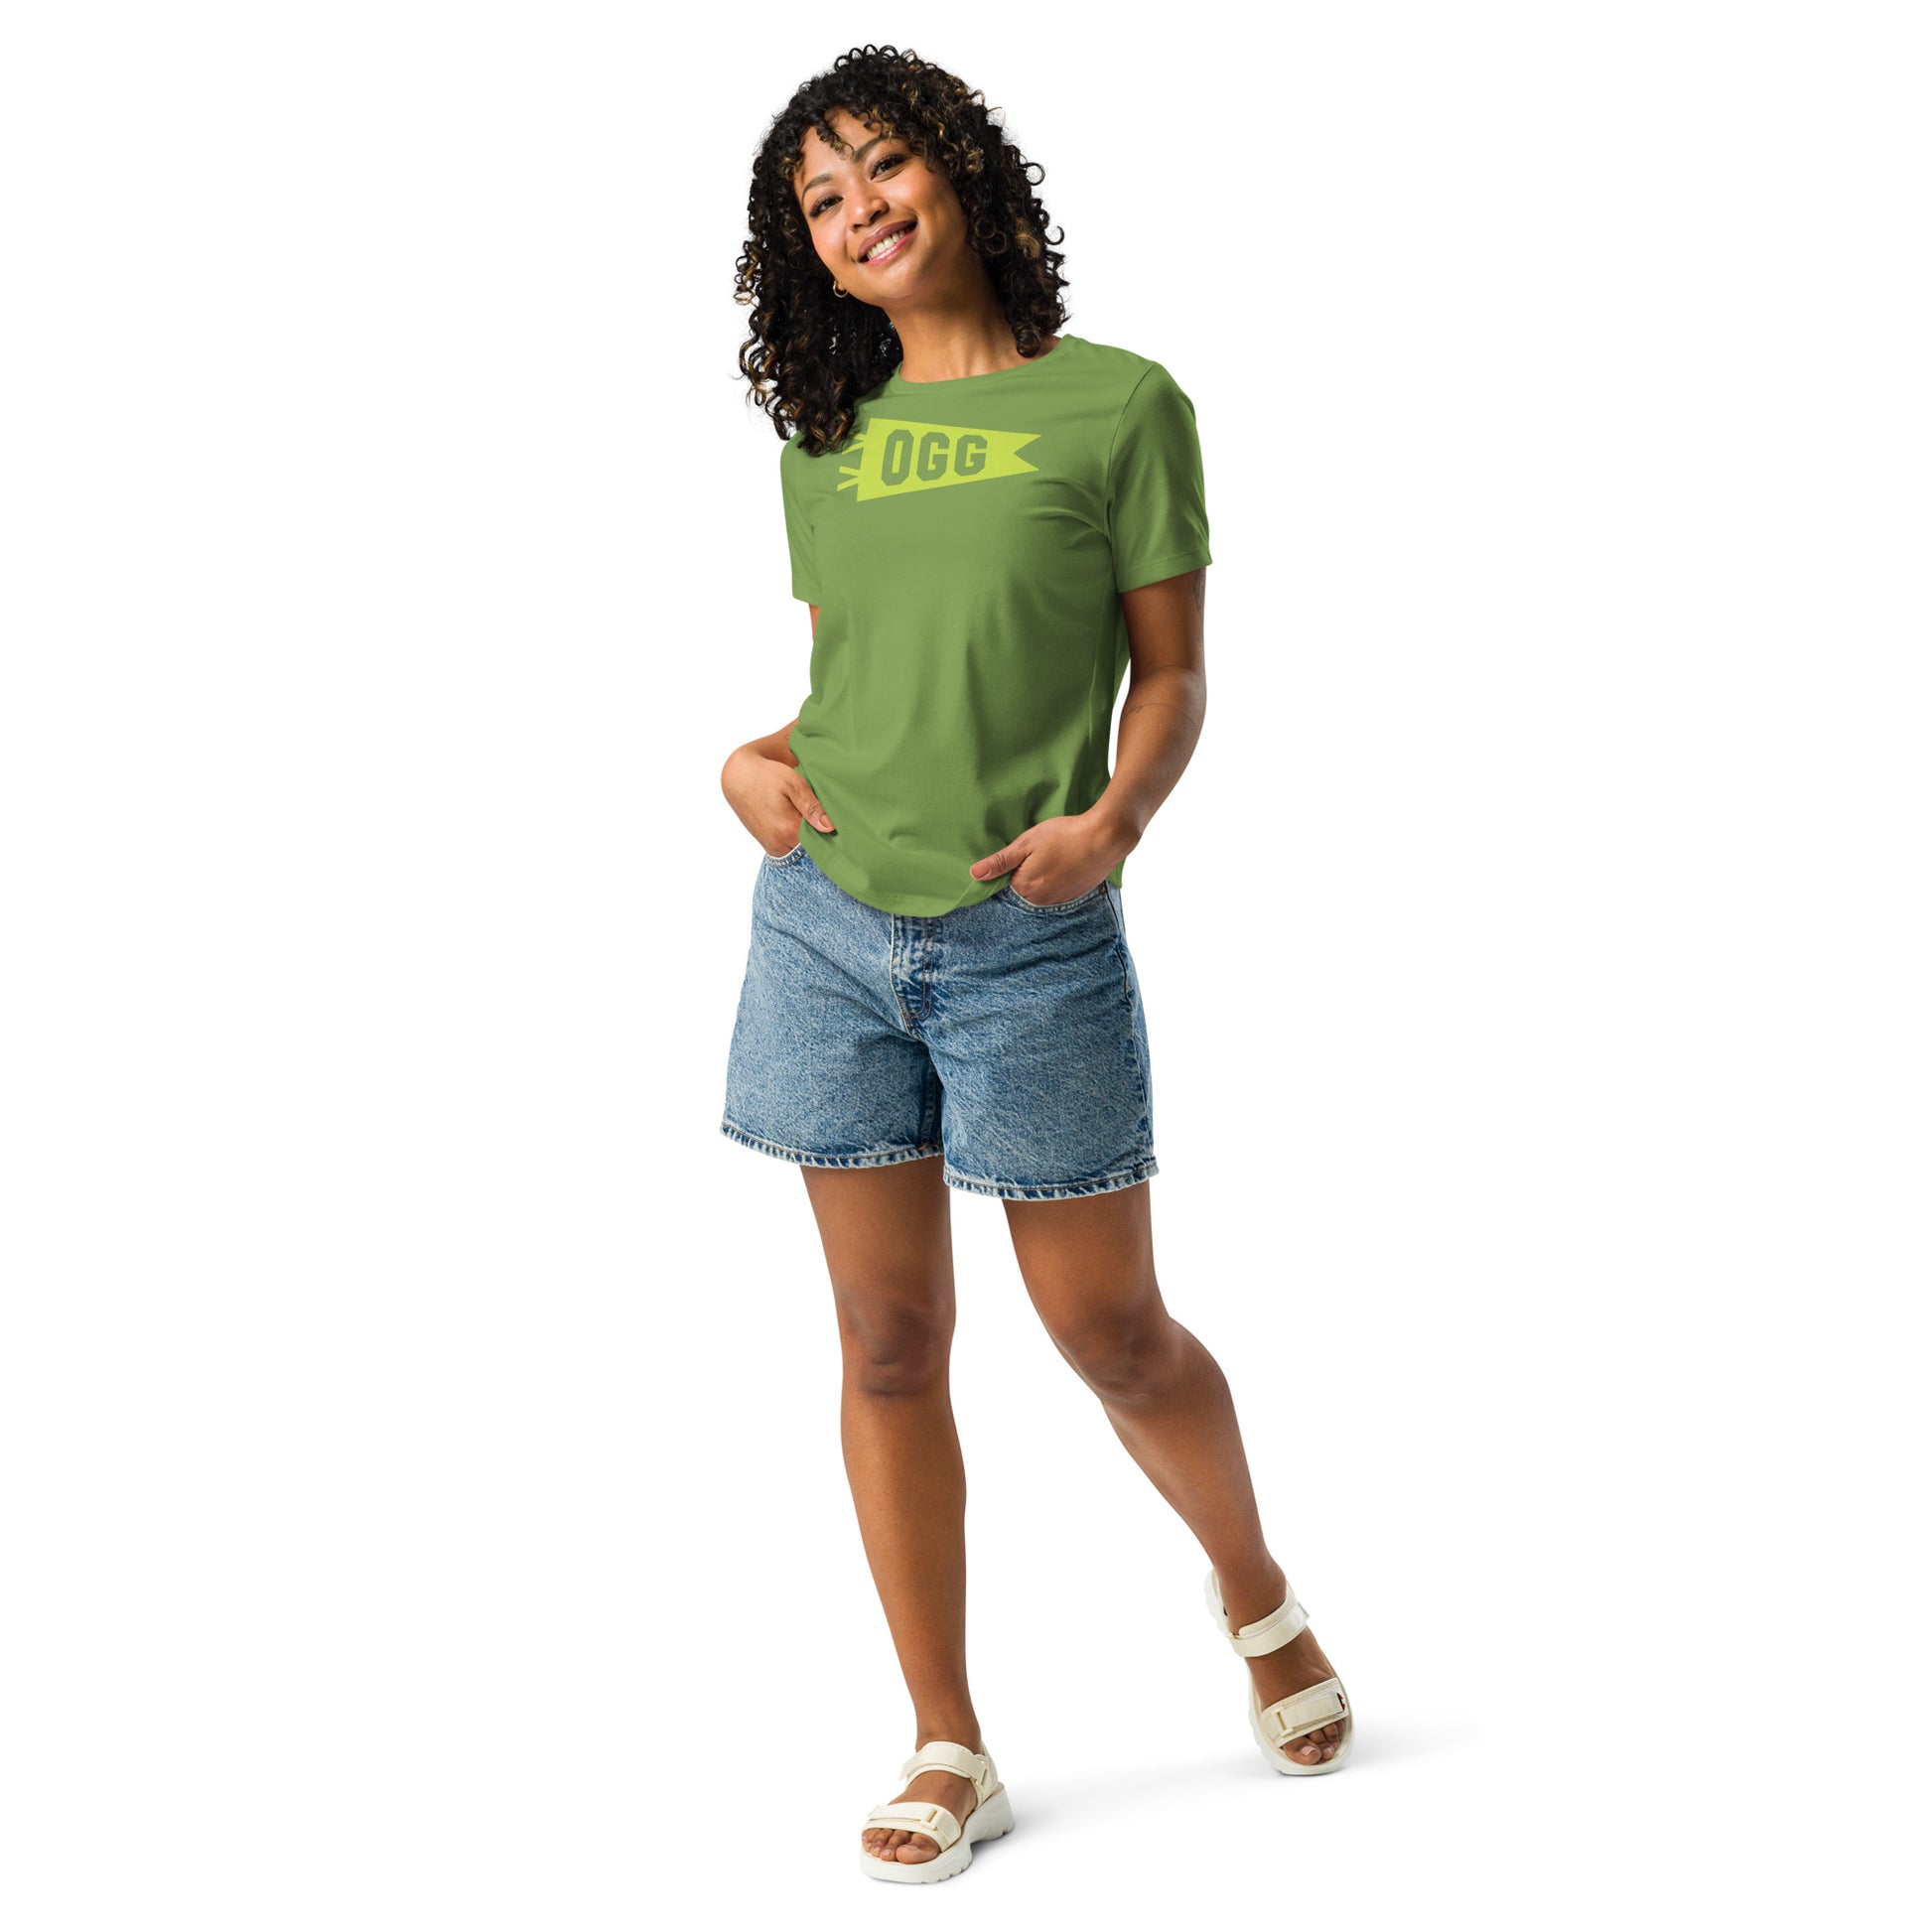 Airport Code Women's Tee - Green Graphic • OGG Maui • YHM Designs - Image 08